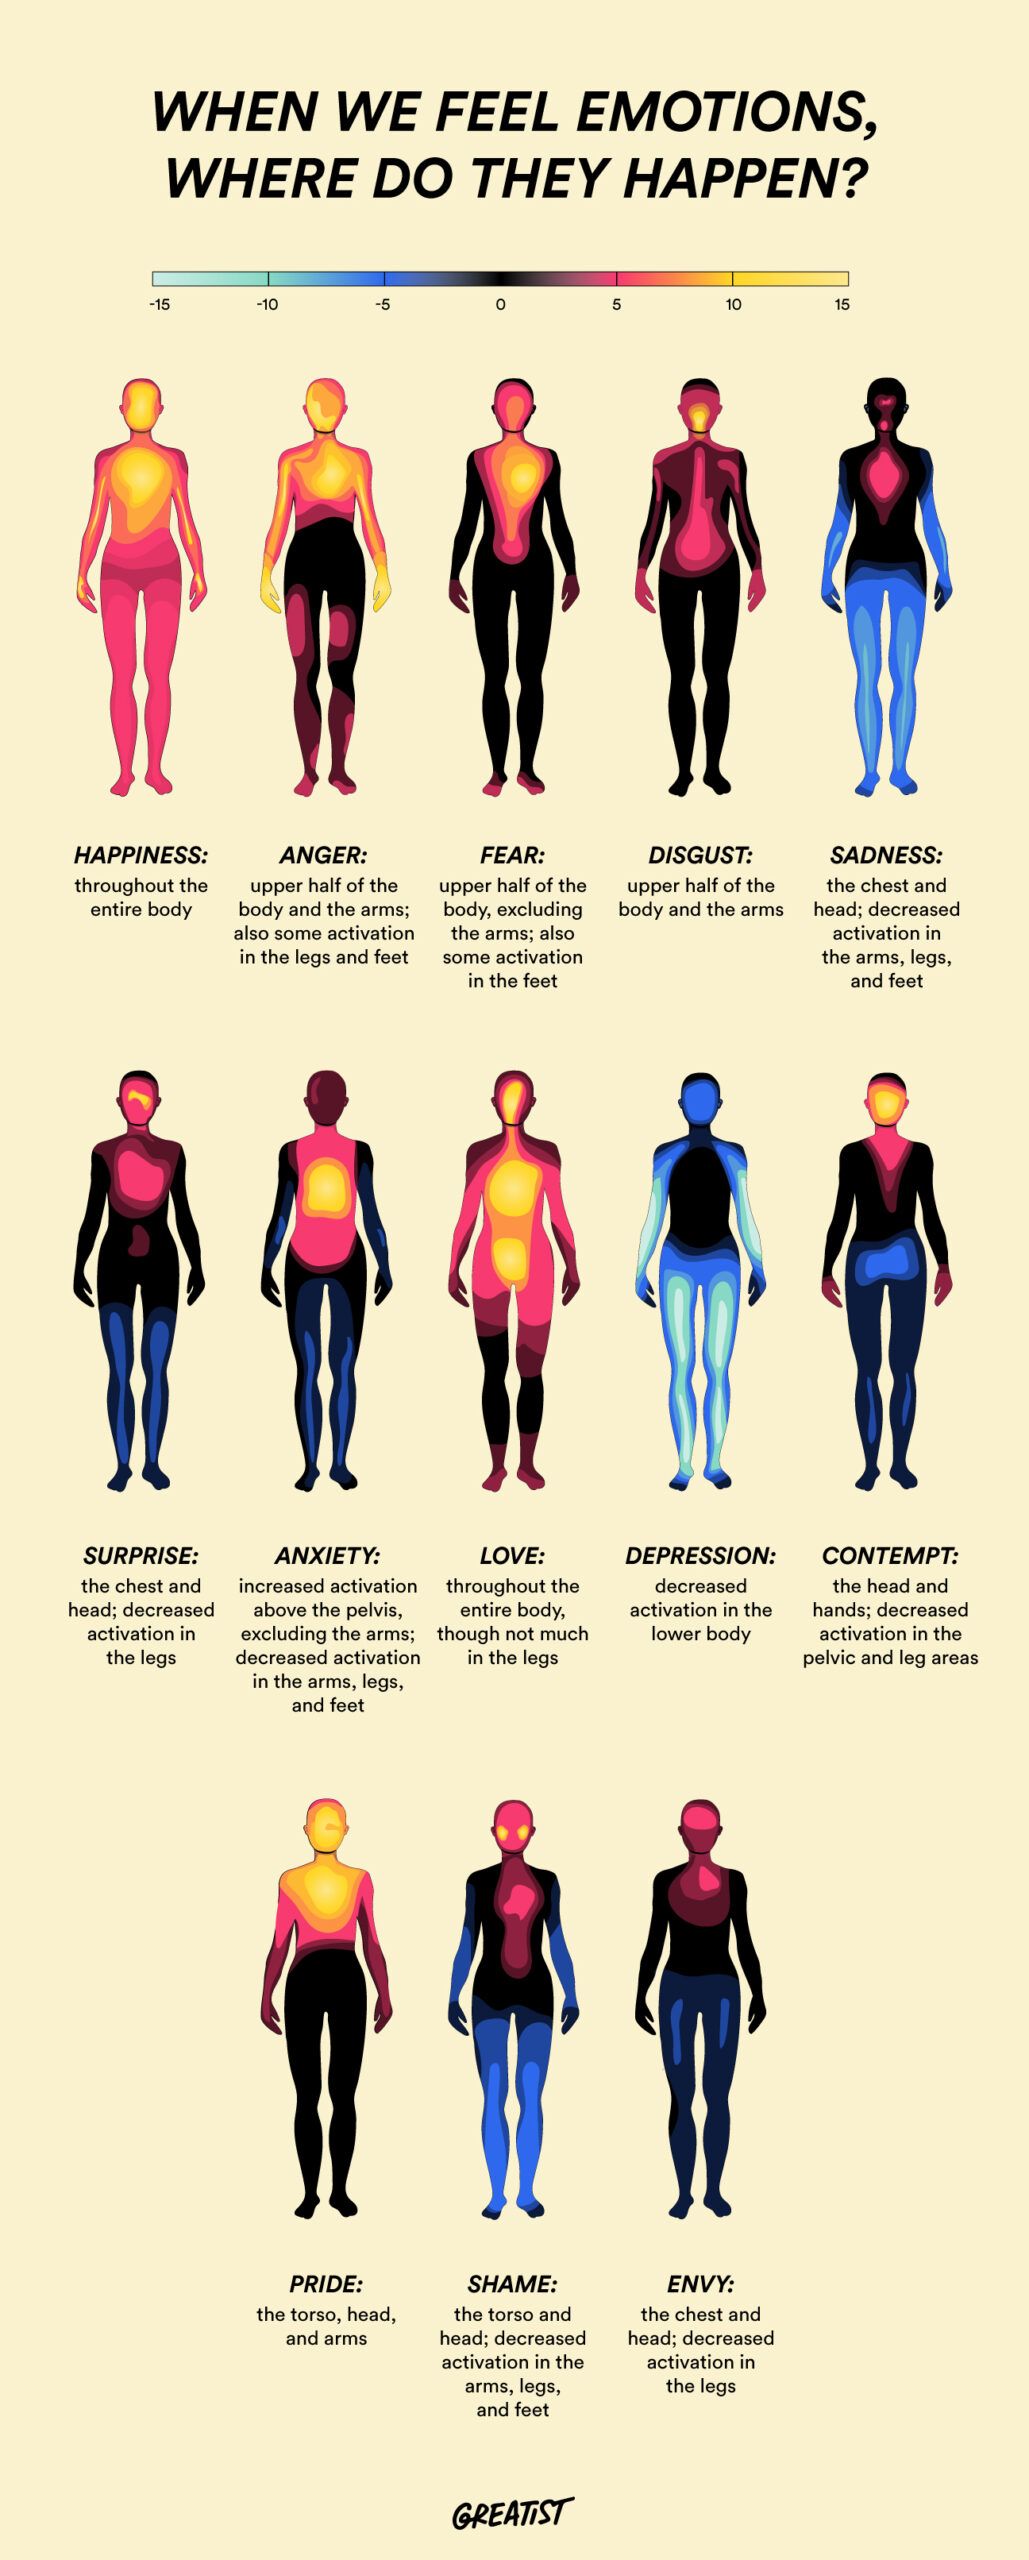 Where Emotions Are Felt In the Body, According to Research